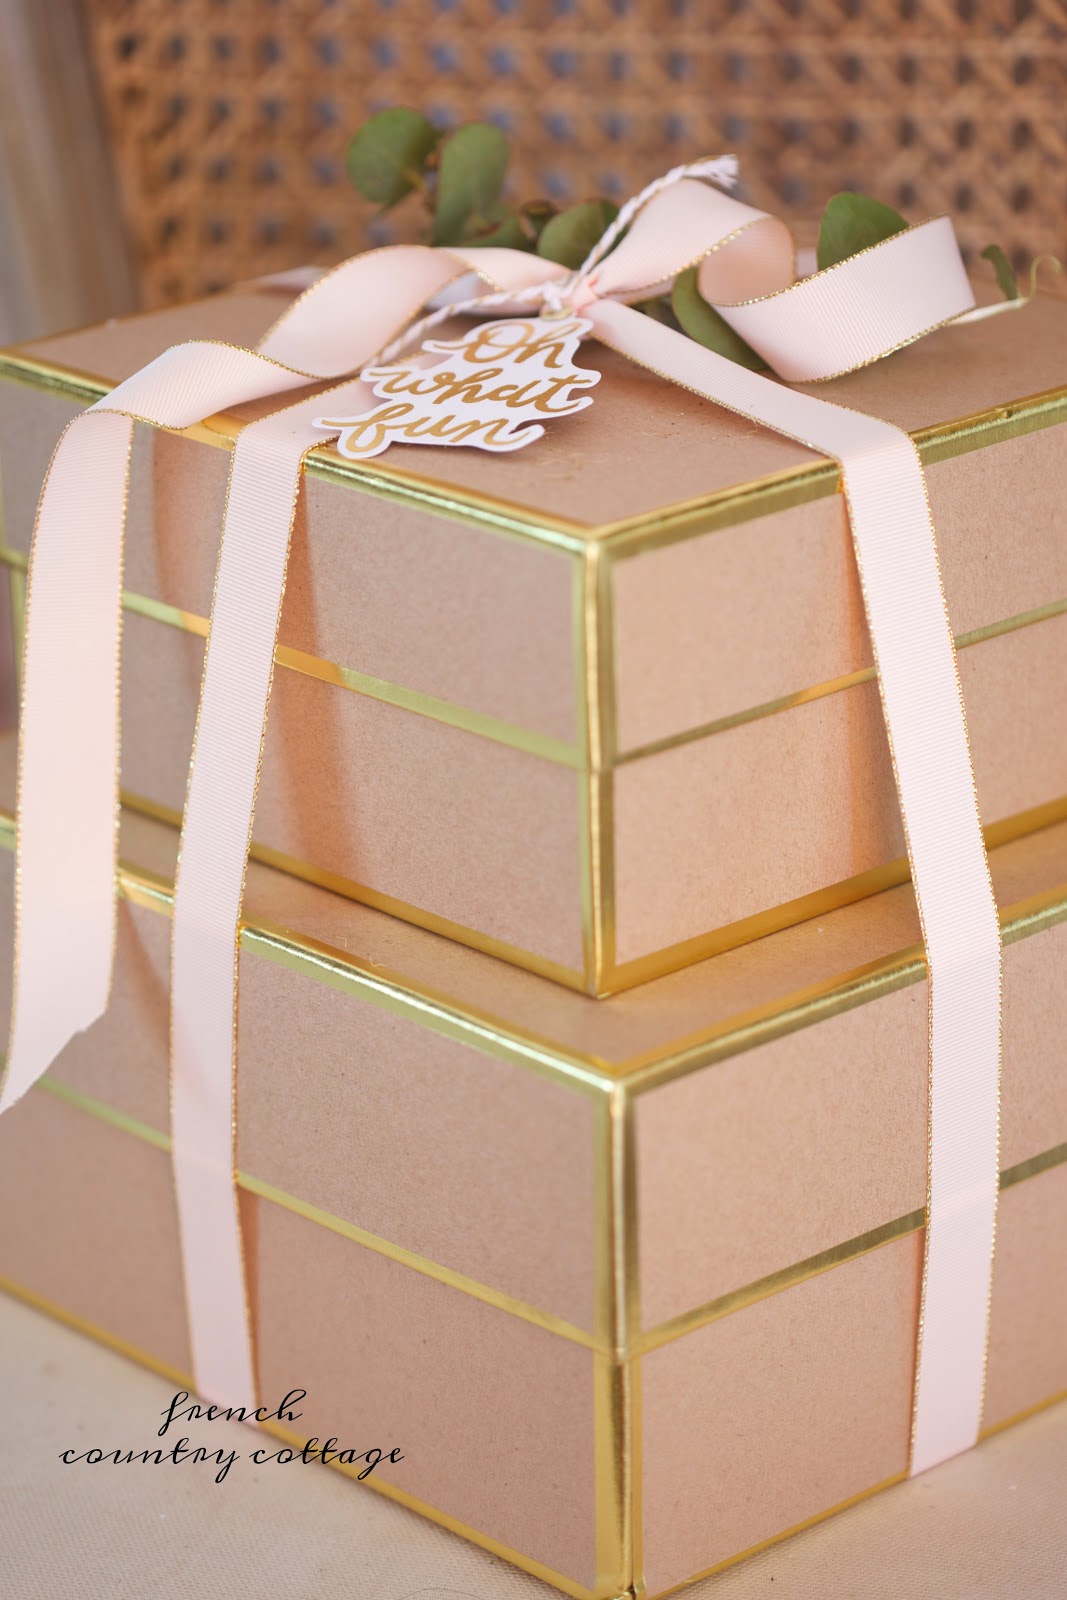 Pretty Packages ~ 5 charming gift wrap ideas - FRENCH COUNTRY COTTAGE